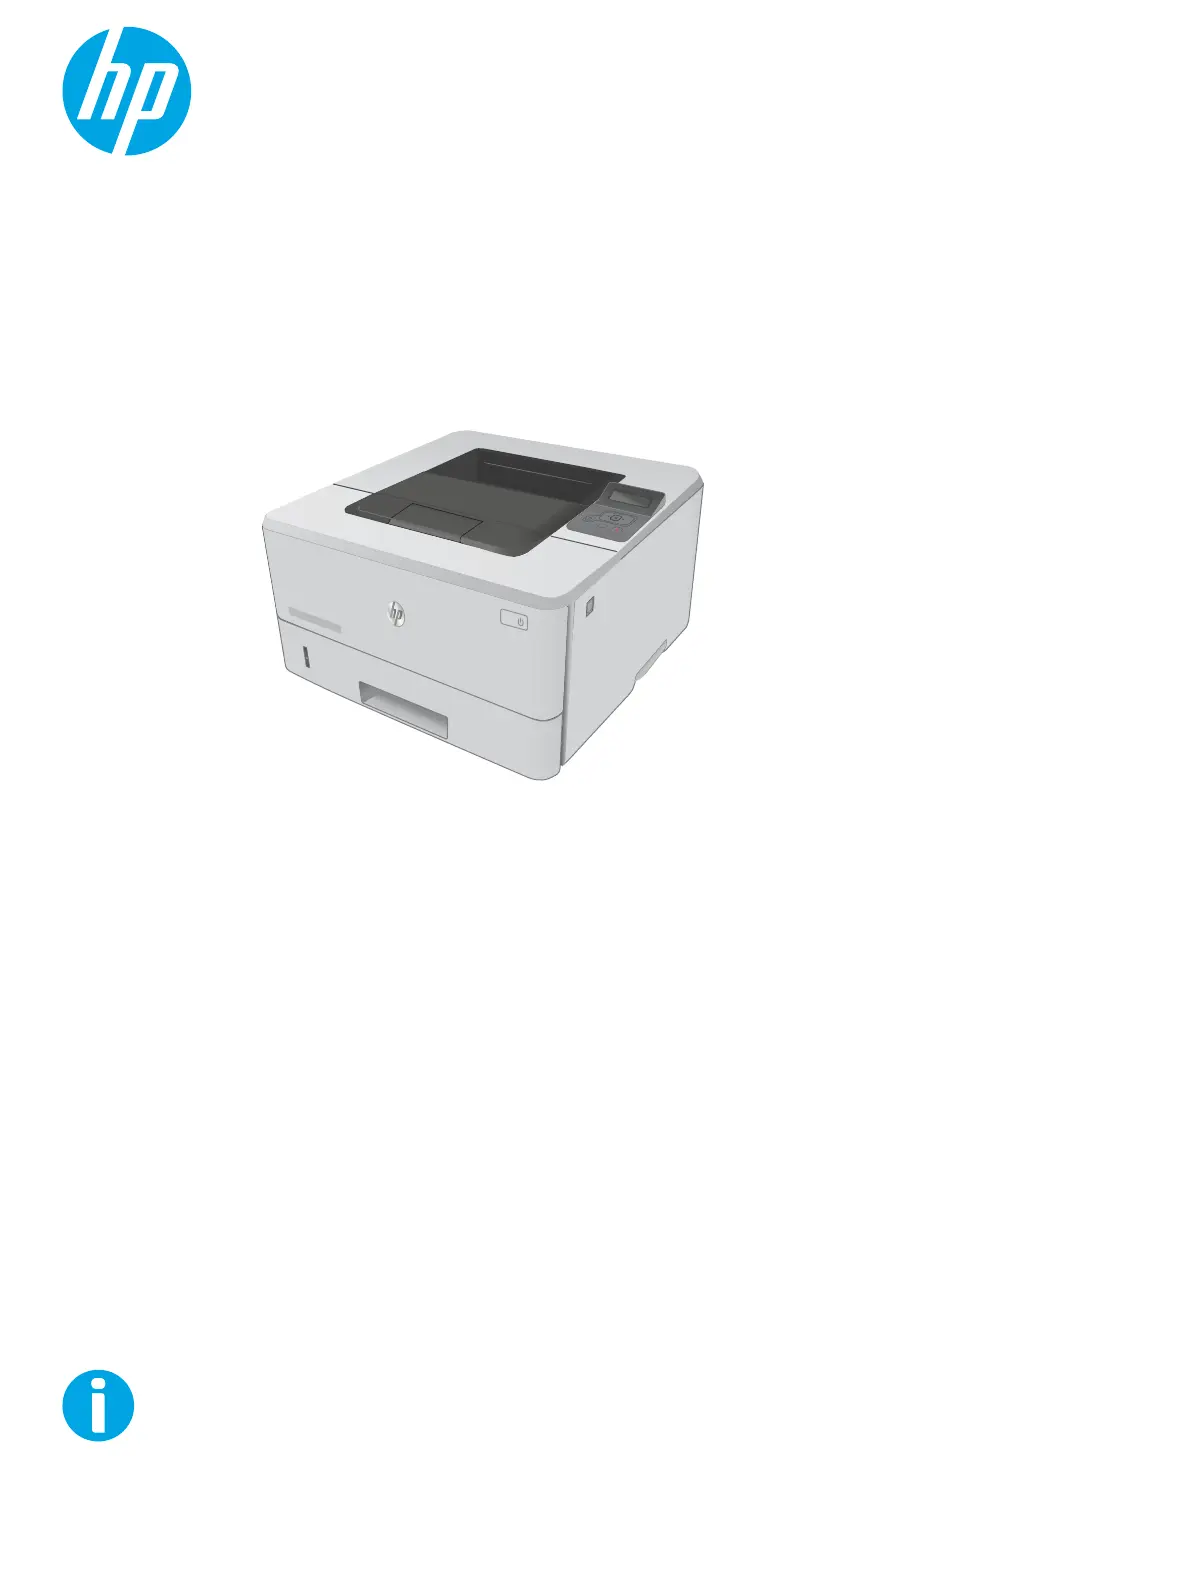 hewlett packard m402dw printer manual - How do I print the supply status page on my HP printer